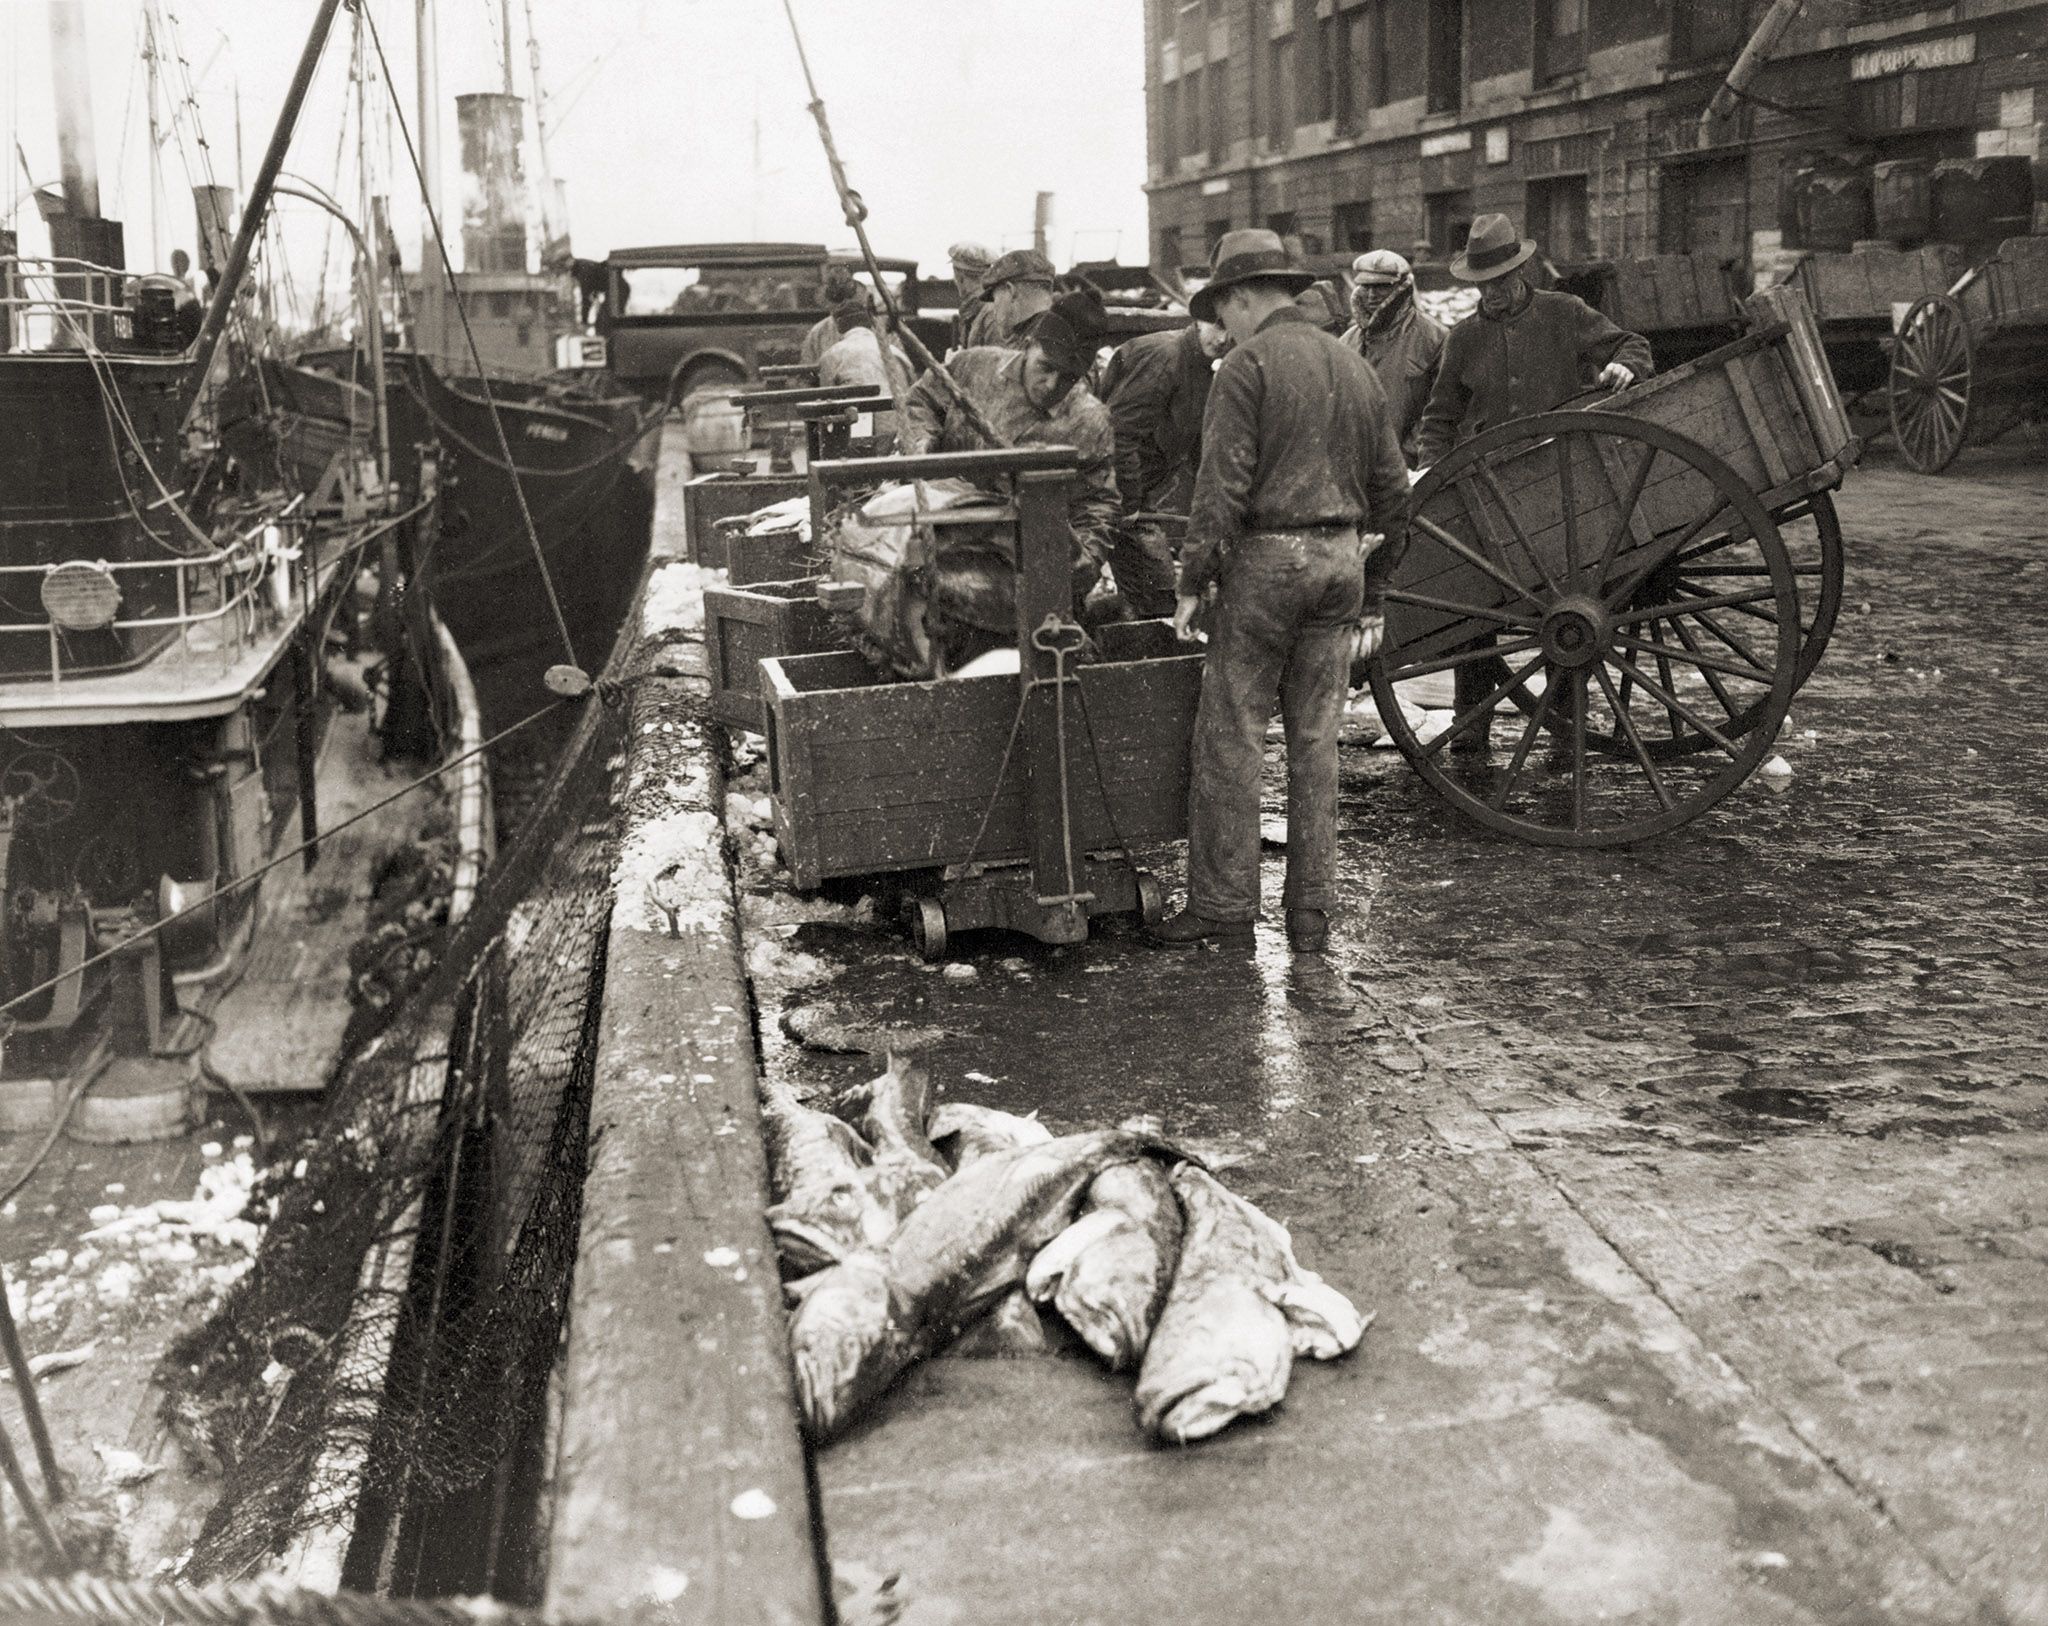 Freshly caught cod and waiting carts on the dock at Fulton Fish Market in 1931.